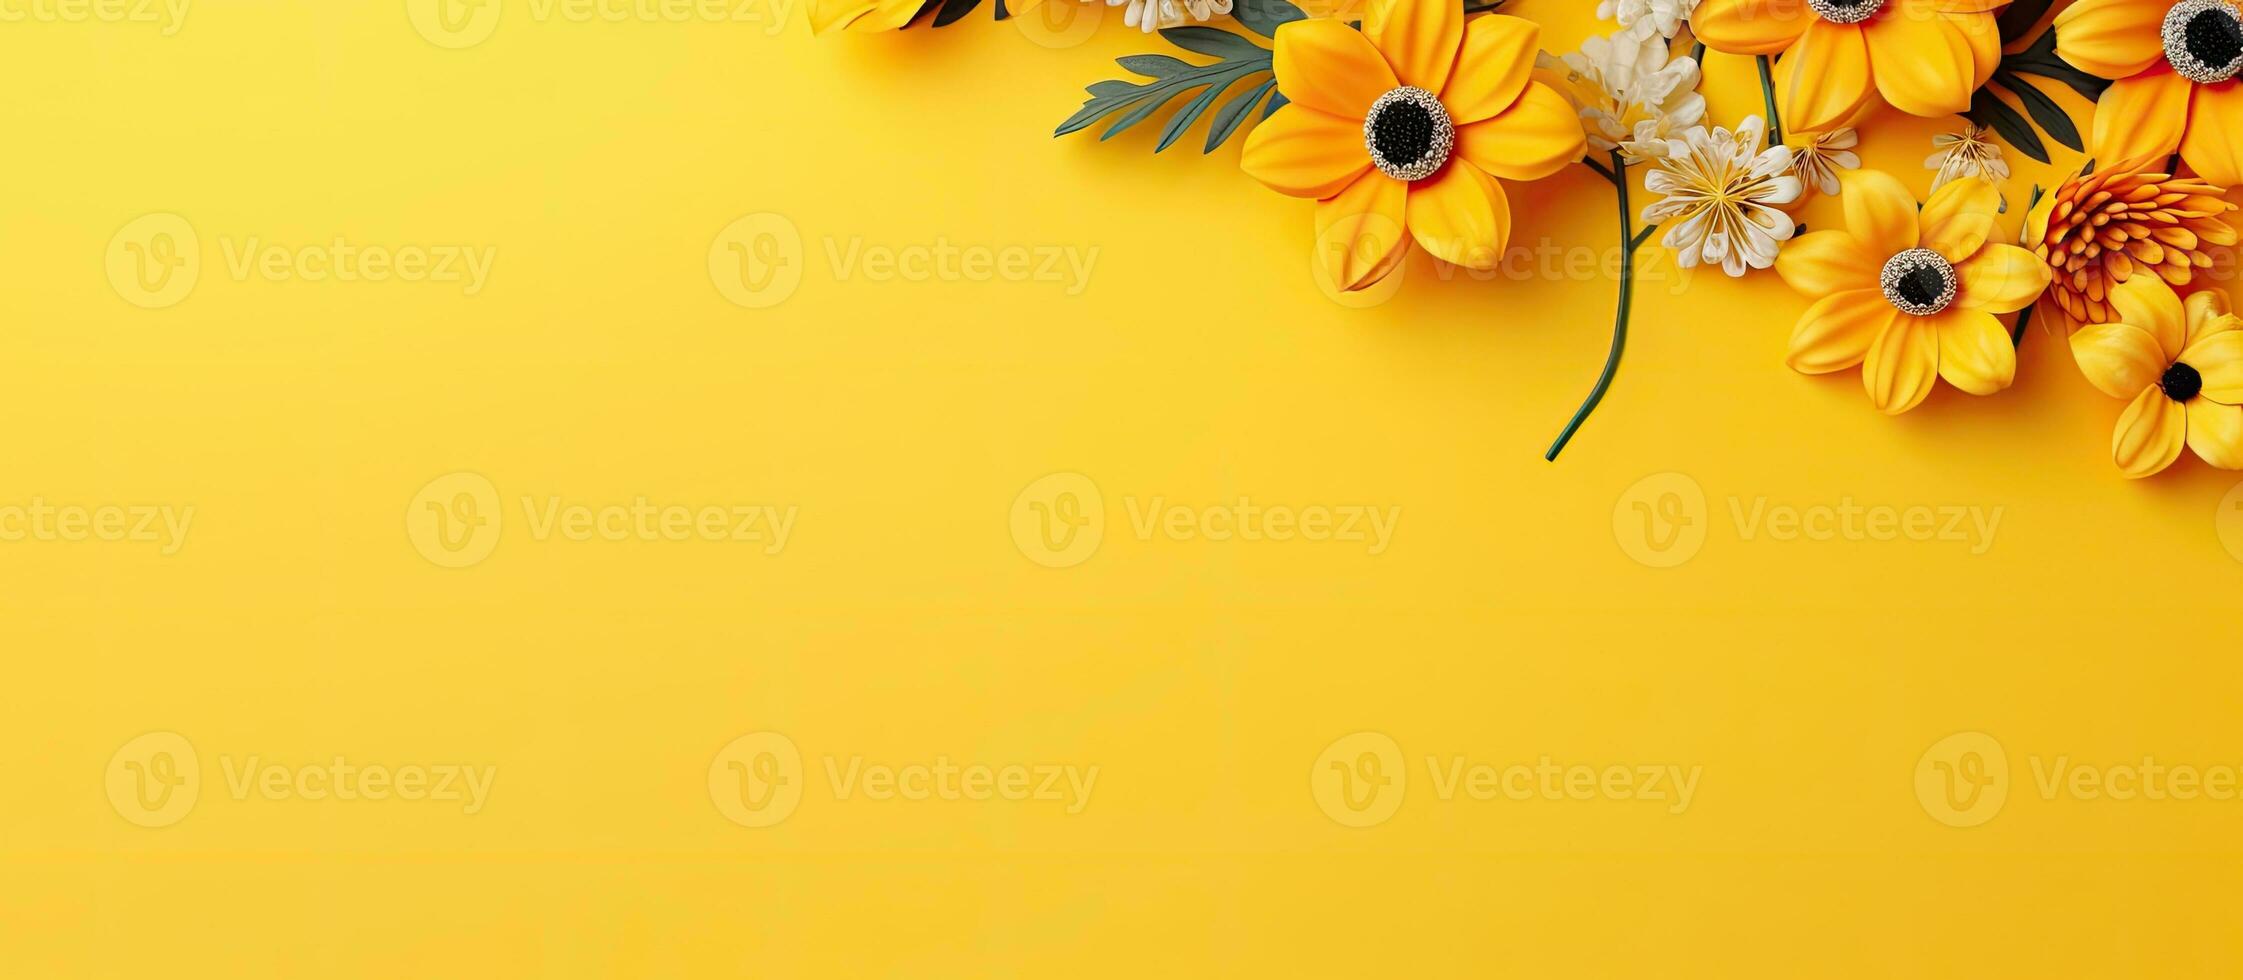 Floral background on trendy yellow Perfect for Children s Day with text space photo